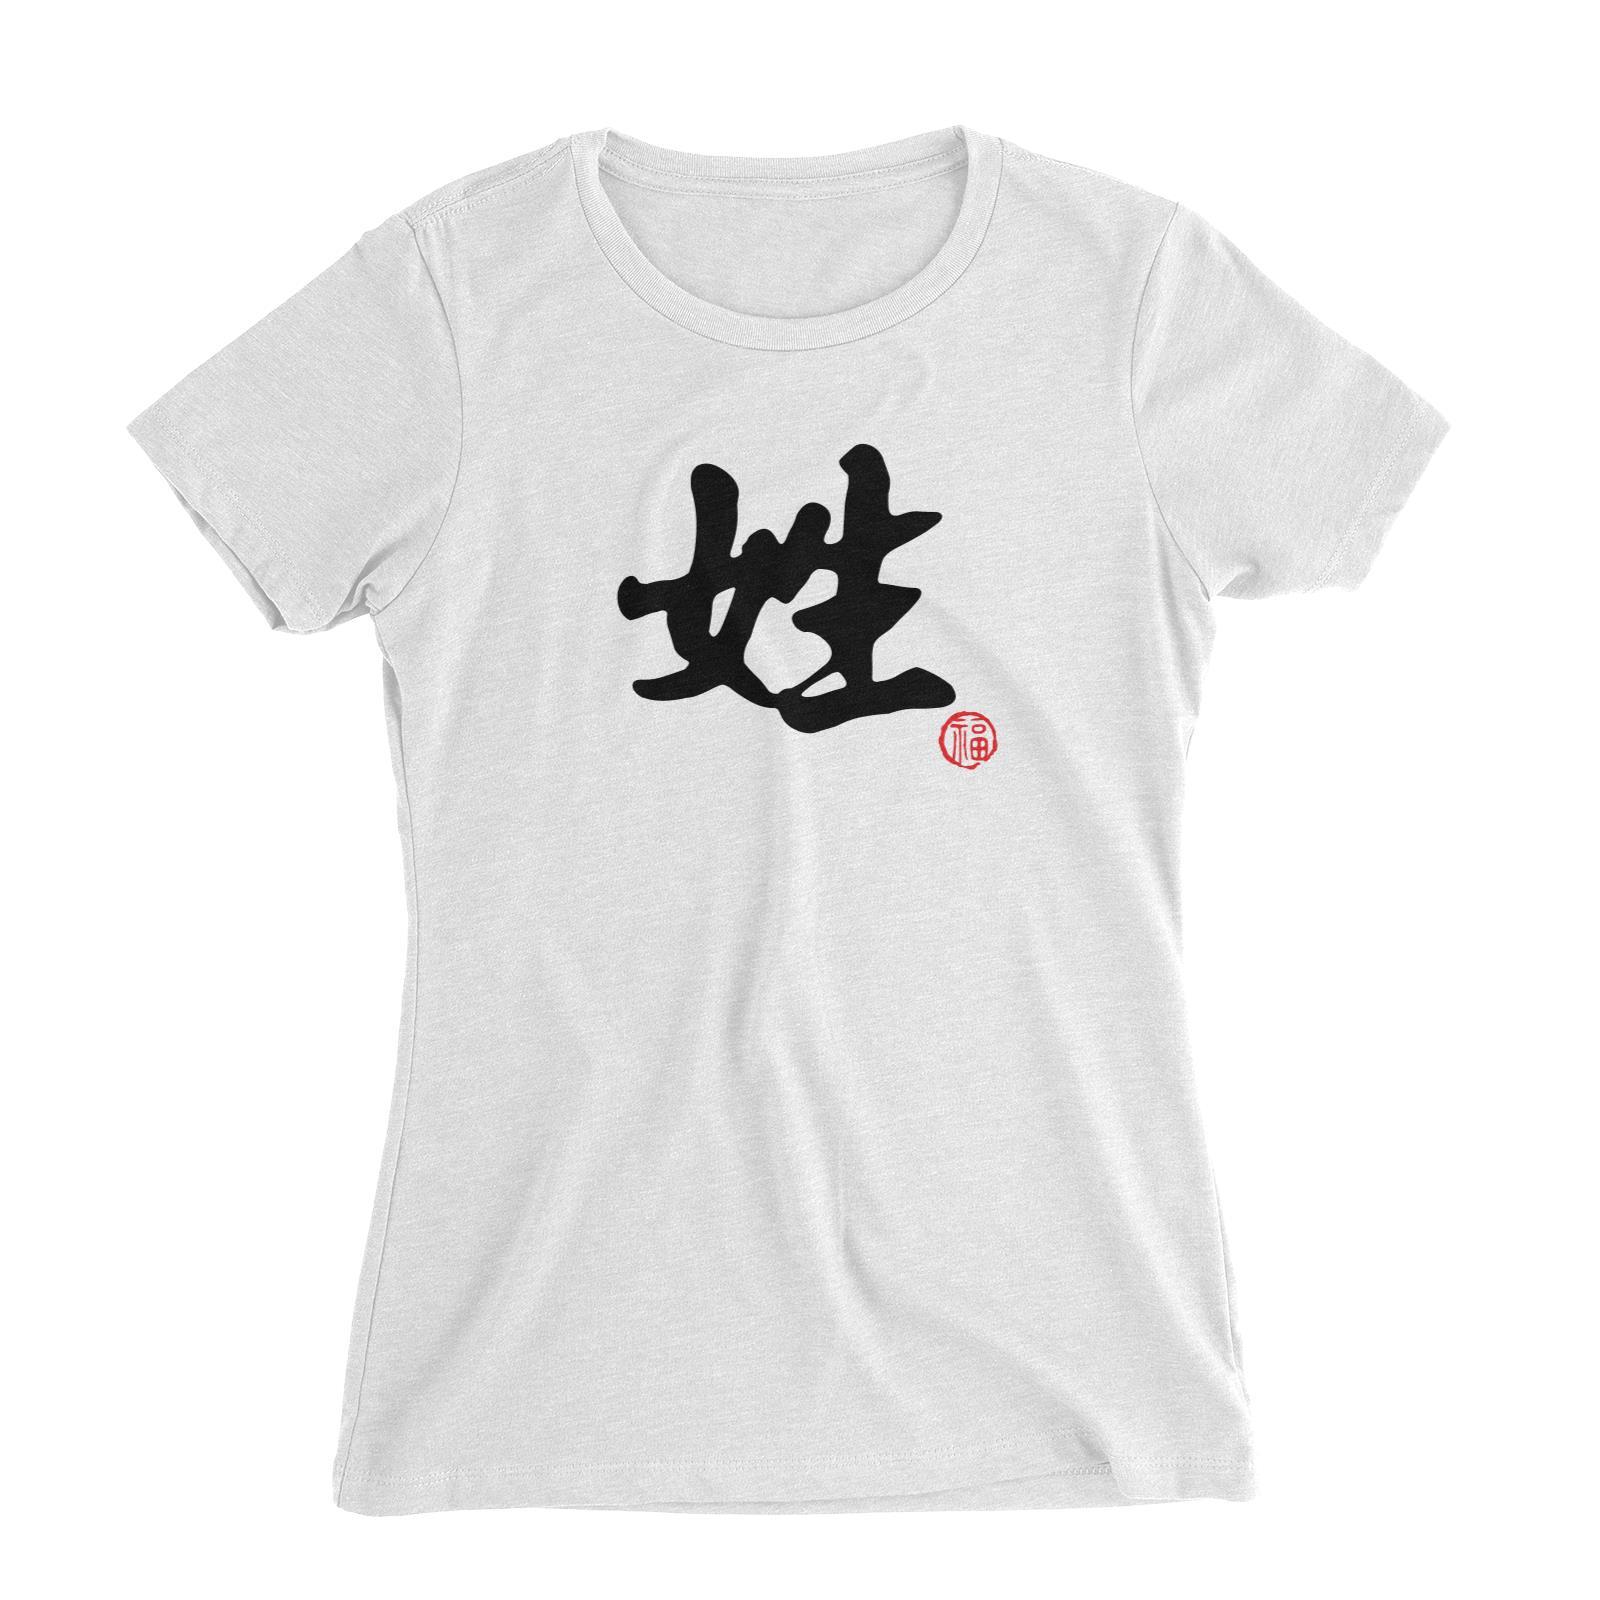 Chinese Surname B&W with Prosperity Seal Women's Slim Fit T-Shirt Matching Family Personalizable Designs